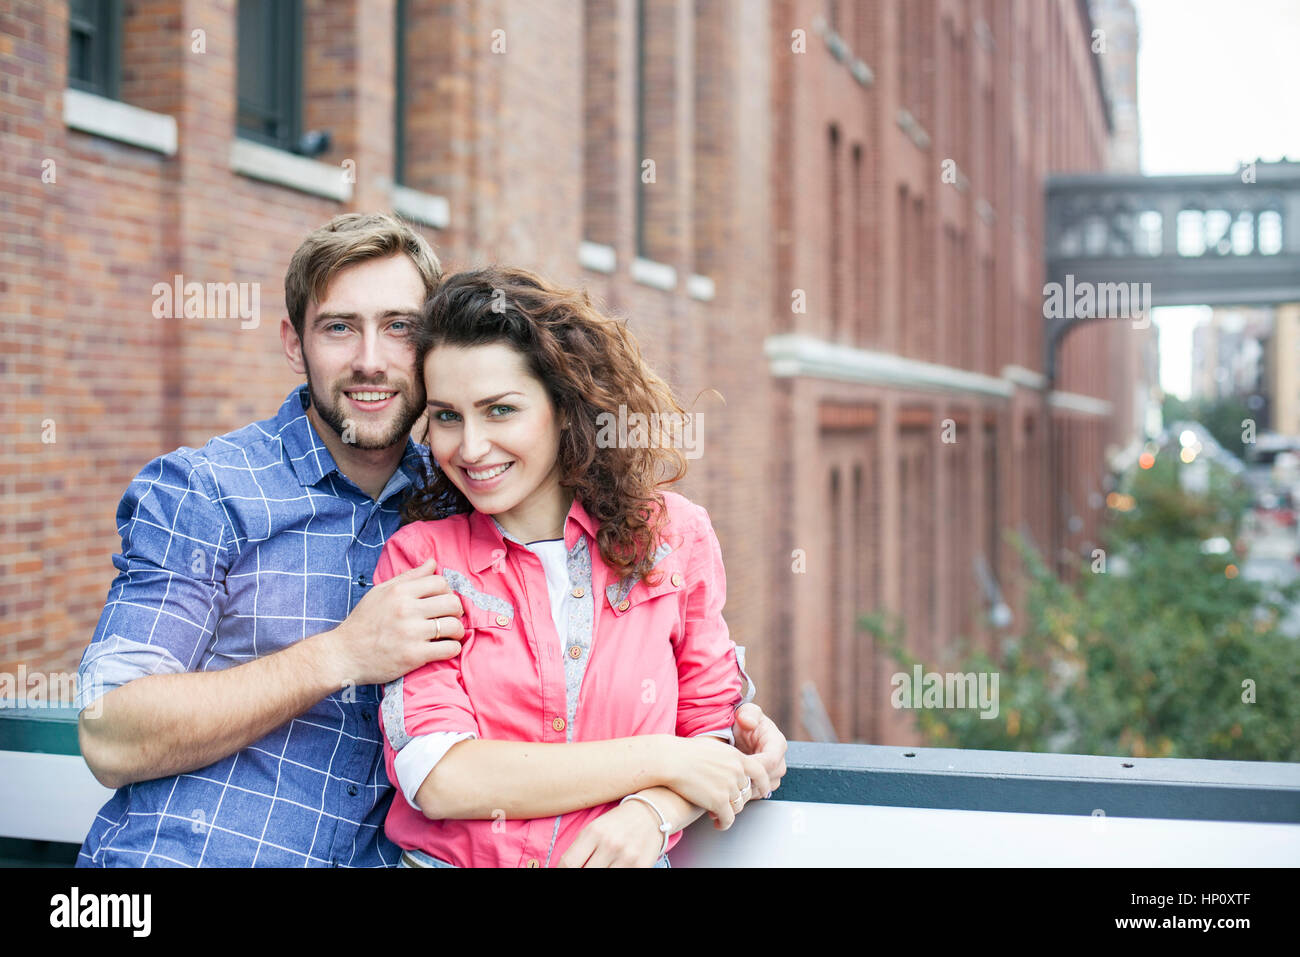 Couple together outdoors, portrait Stock Photo